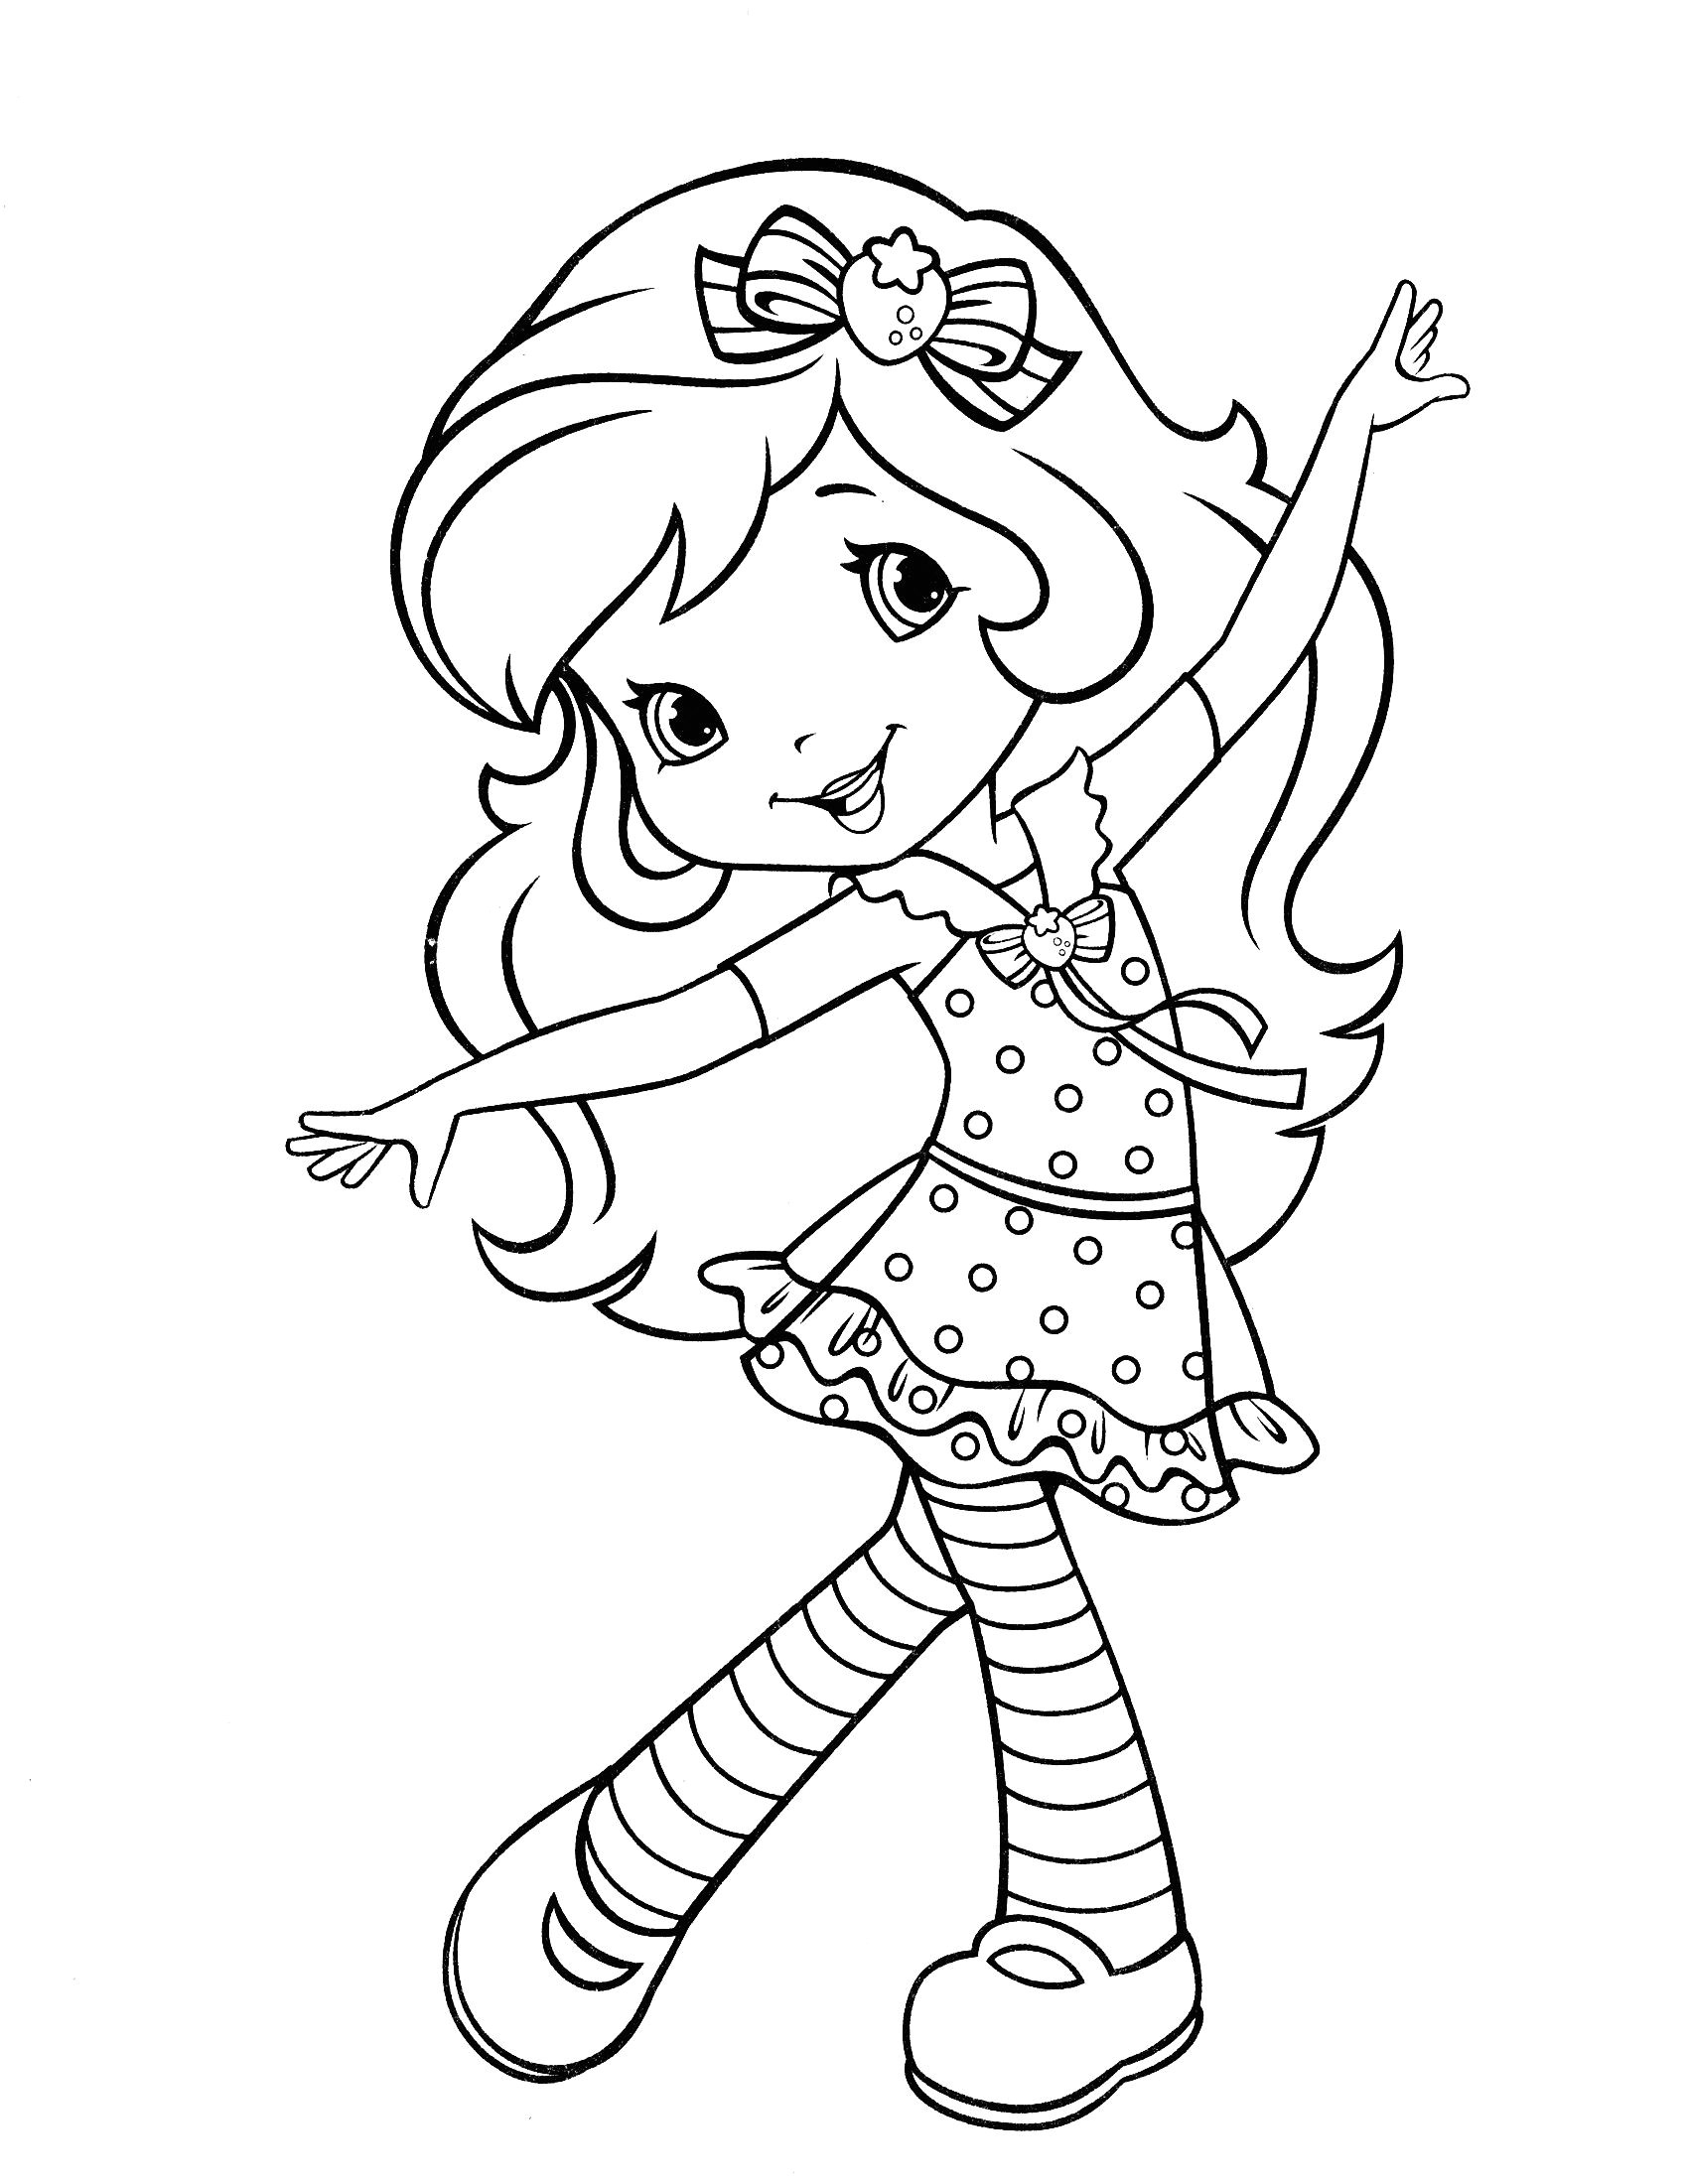 strawberry shortcake coloring pages Pesquisa Google